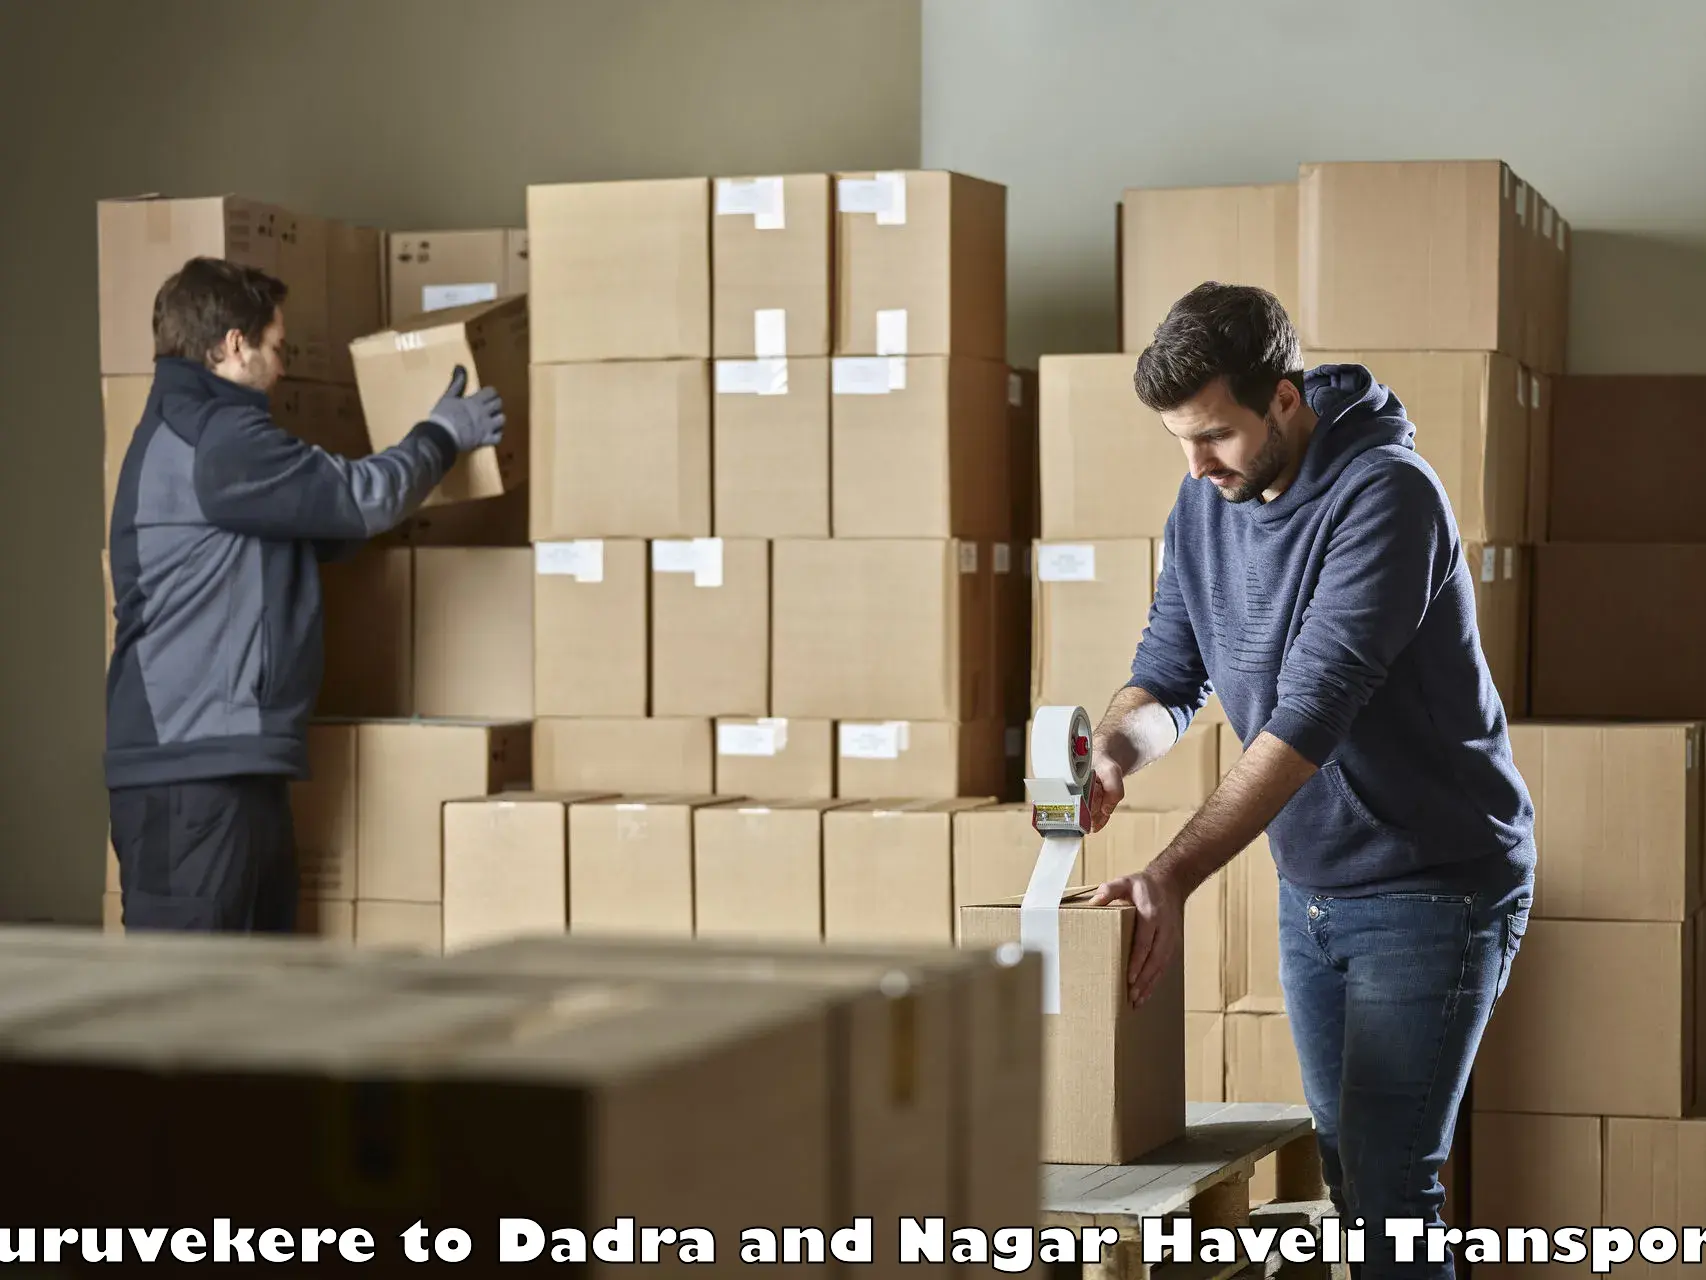 Container transport service Turuvekere to Dadra and Nagar Haveli